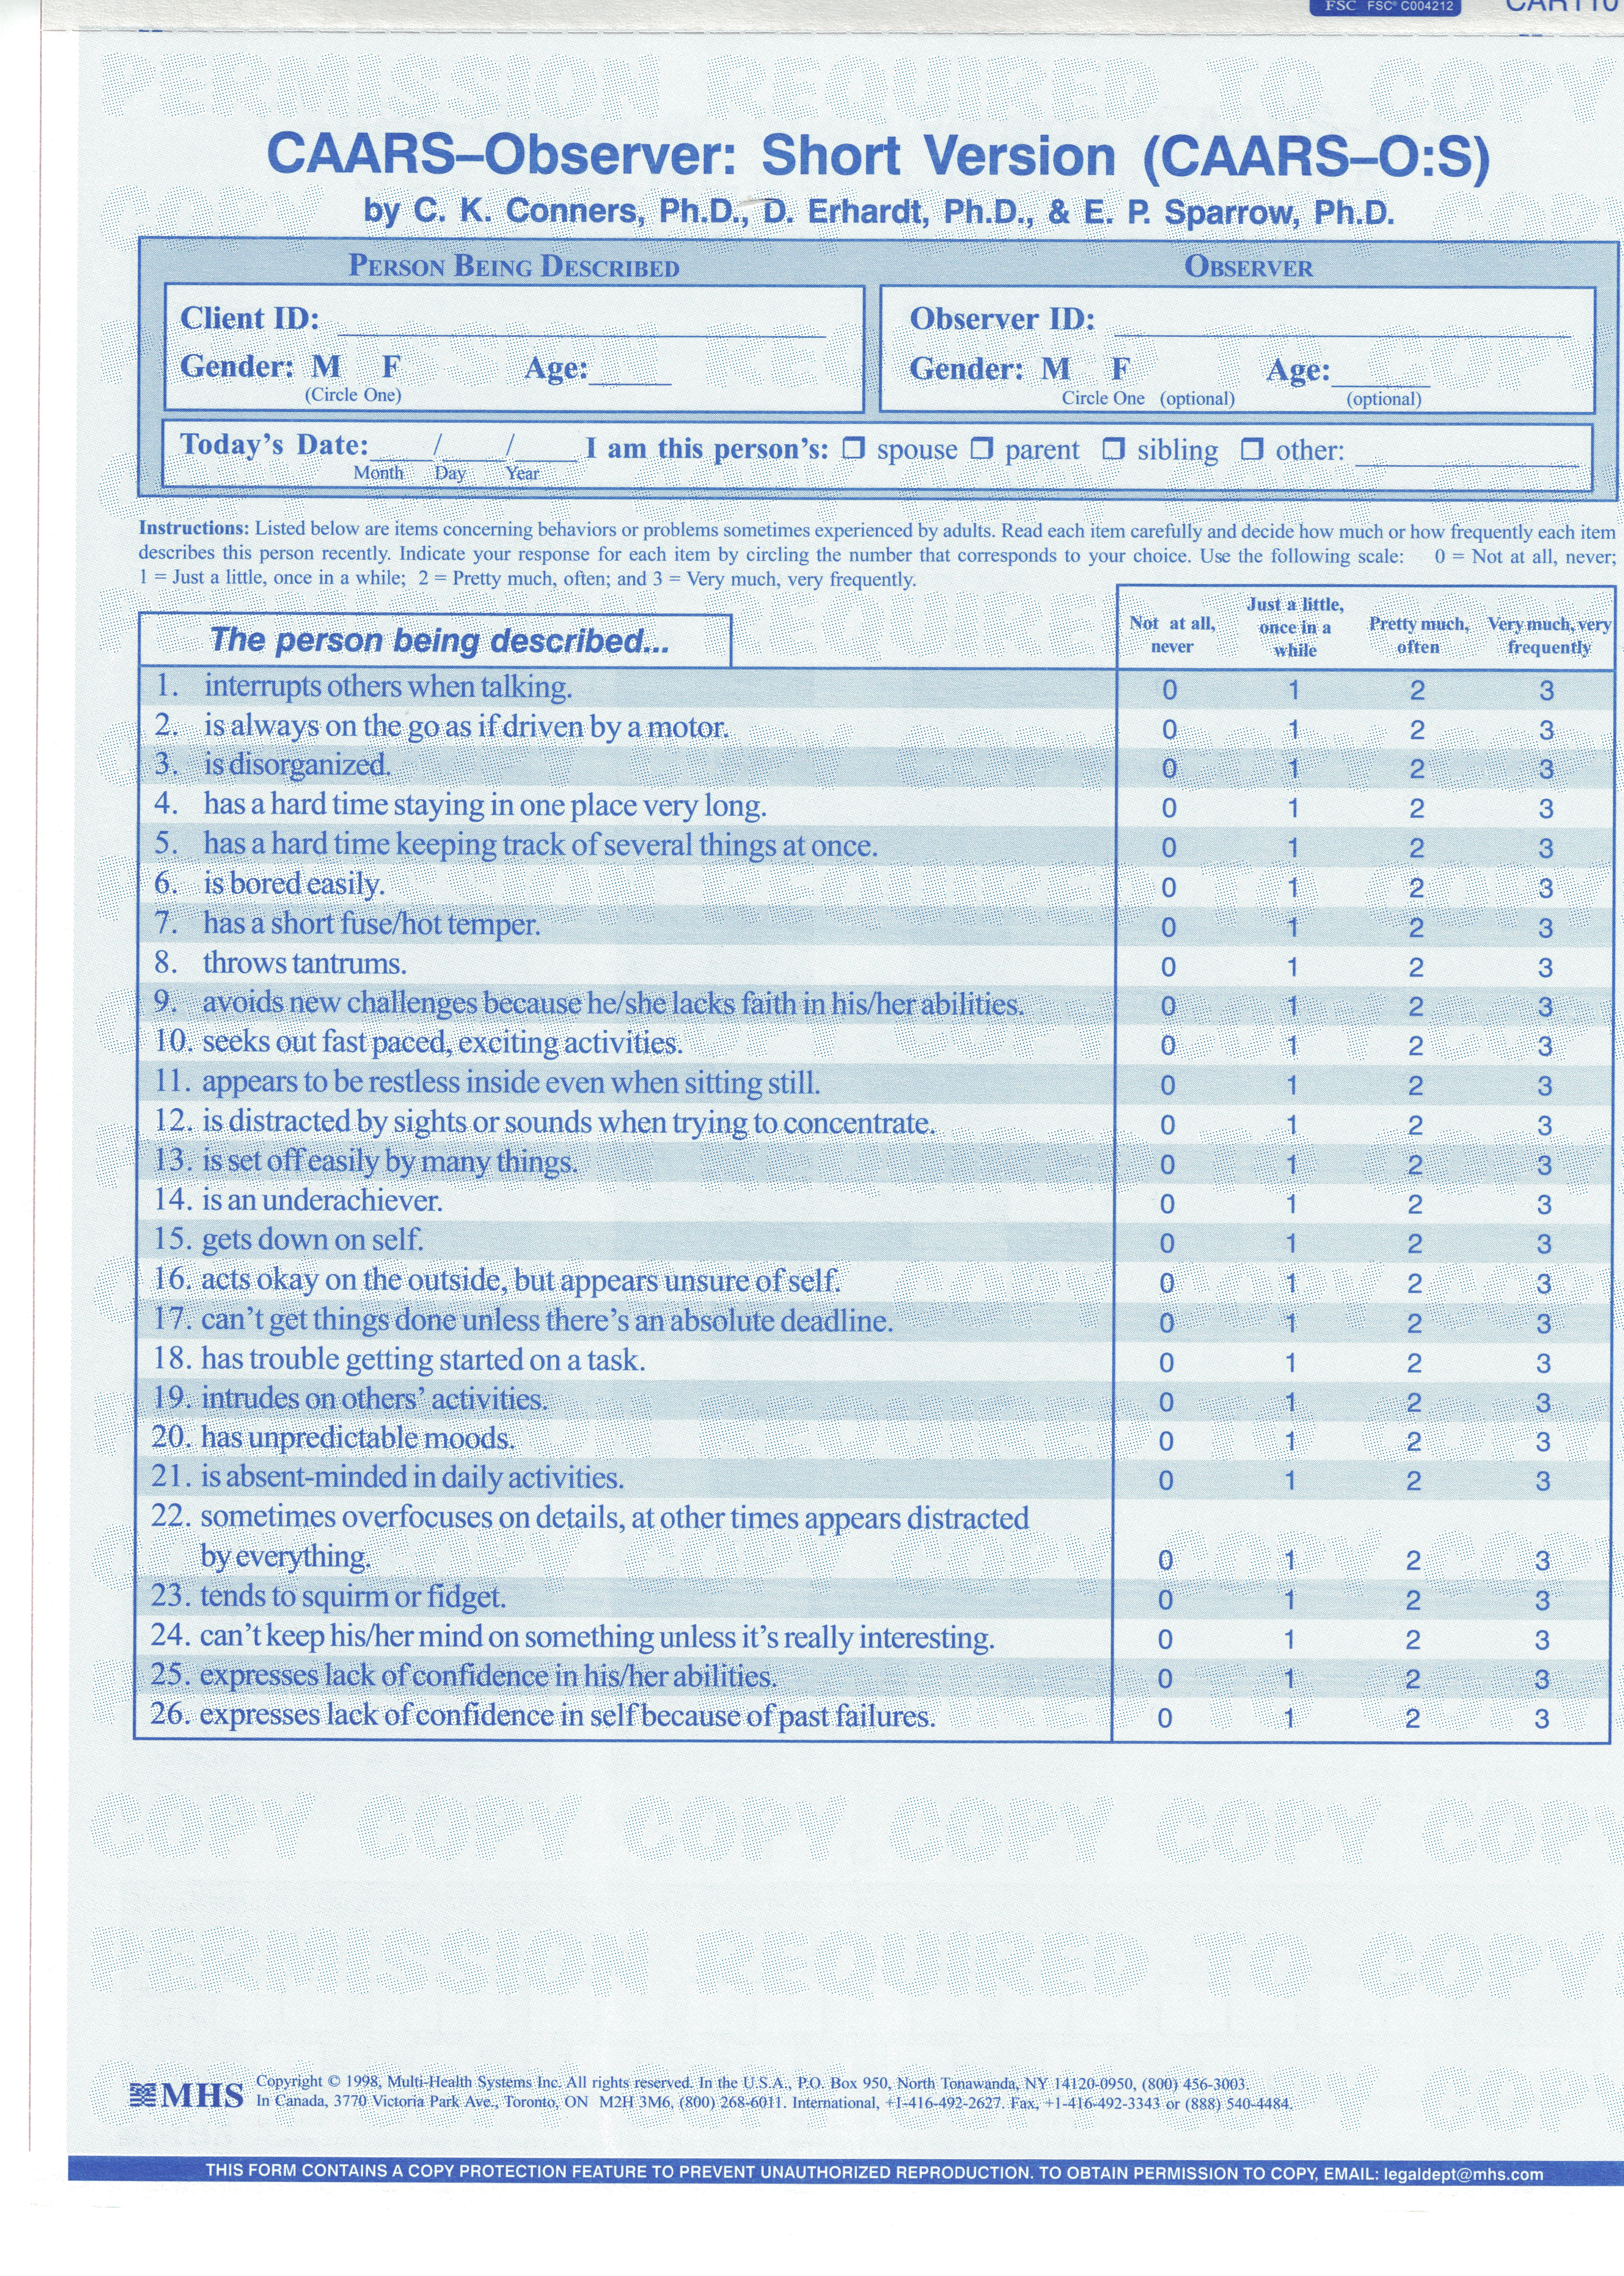 Conners CAARS Adult ADHD Rating Scales - CAARS-O-S Quikscore Forms